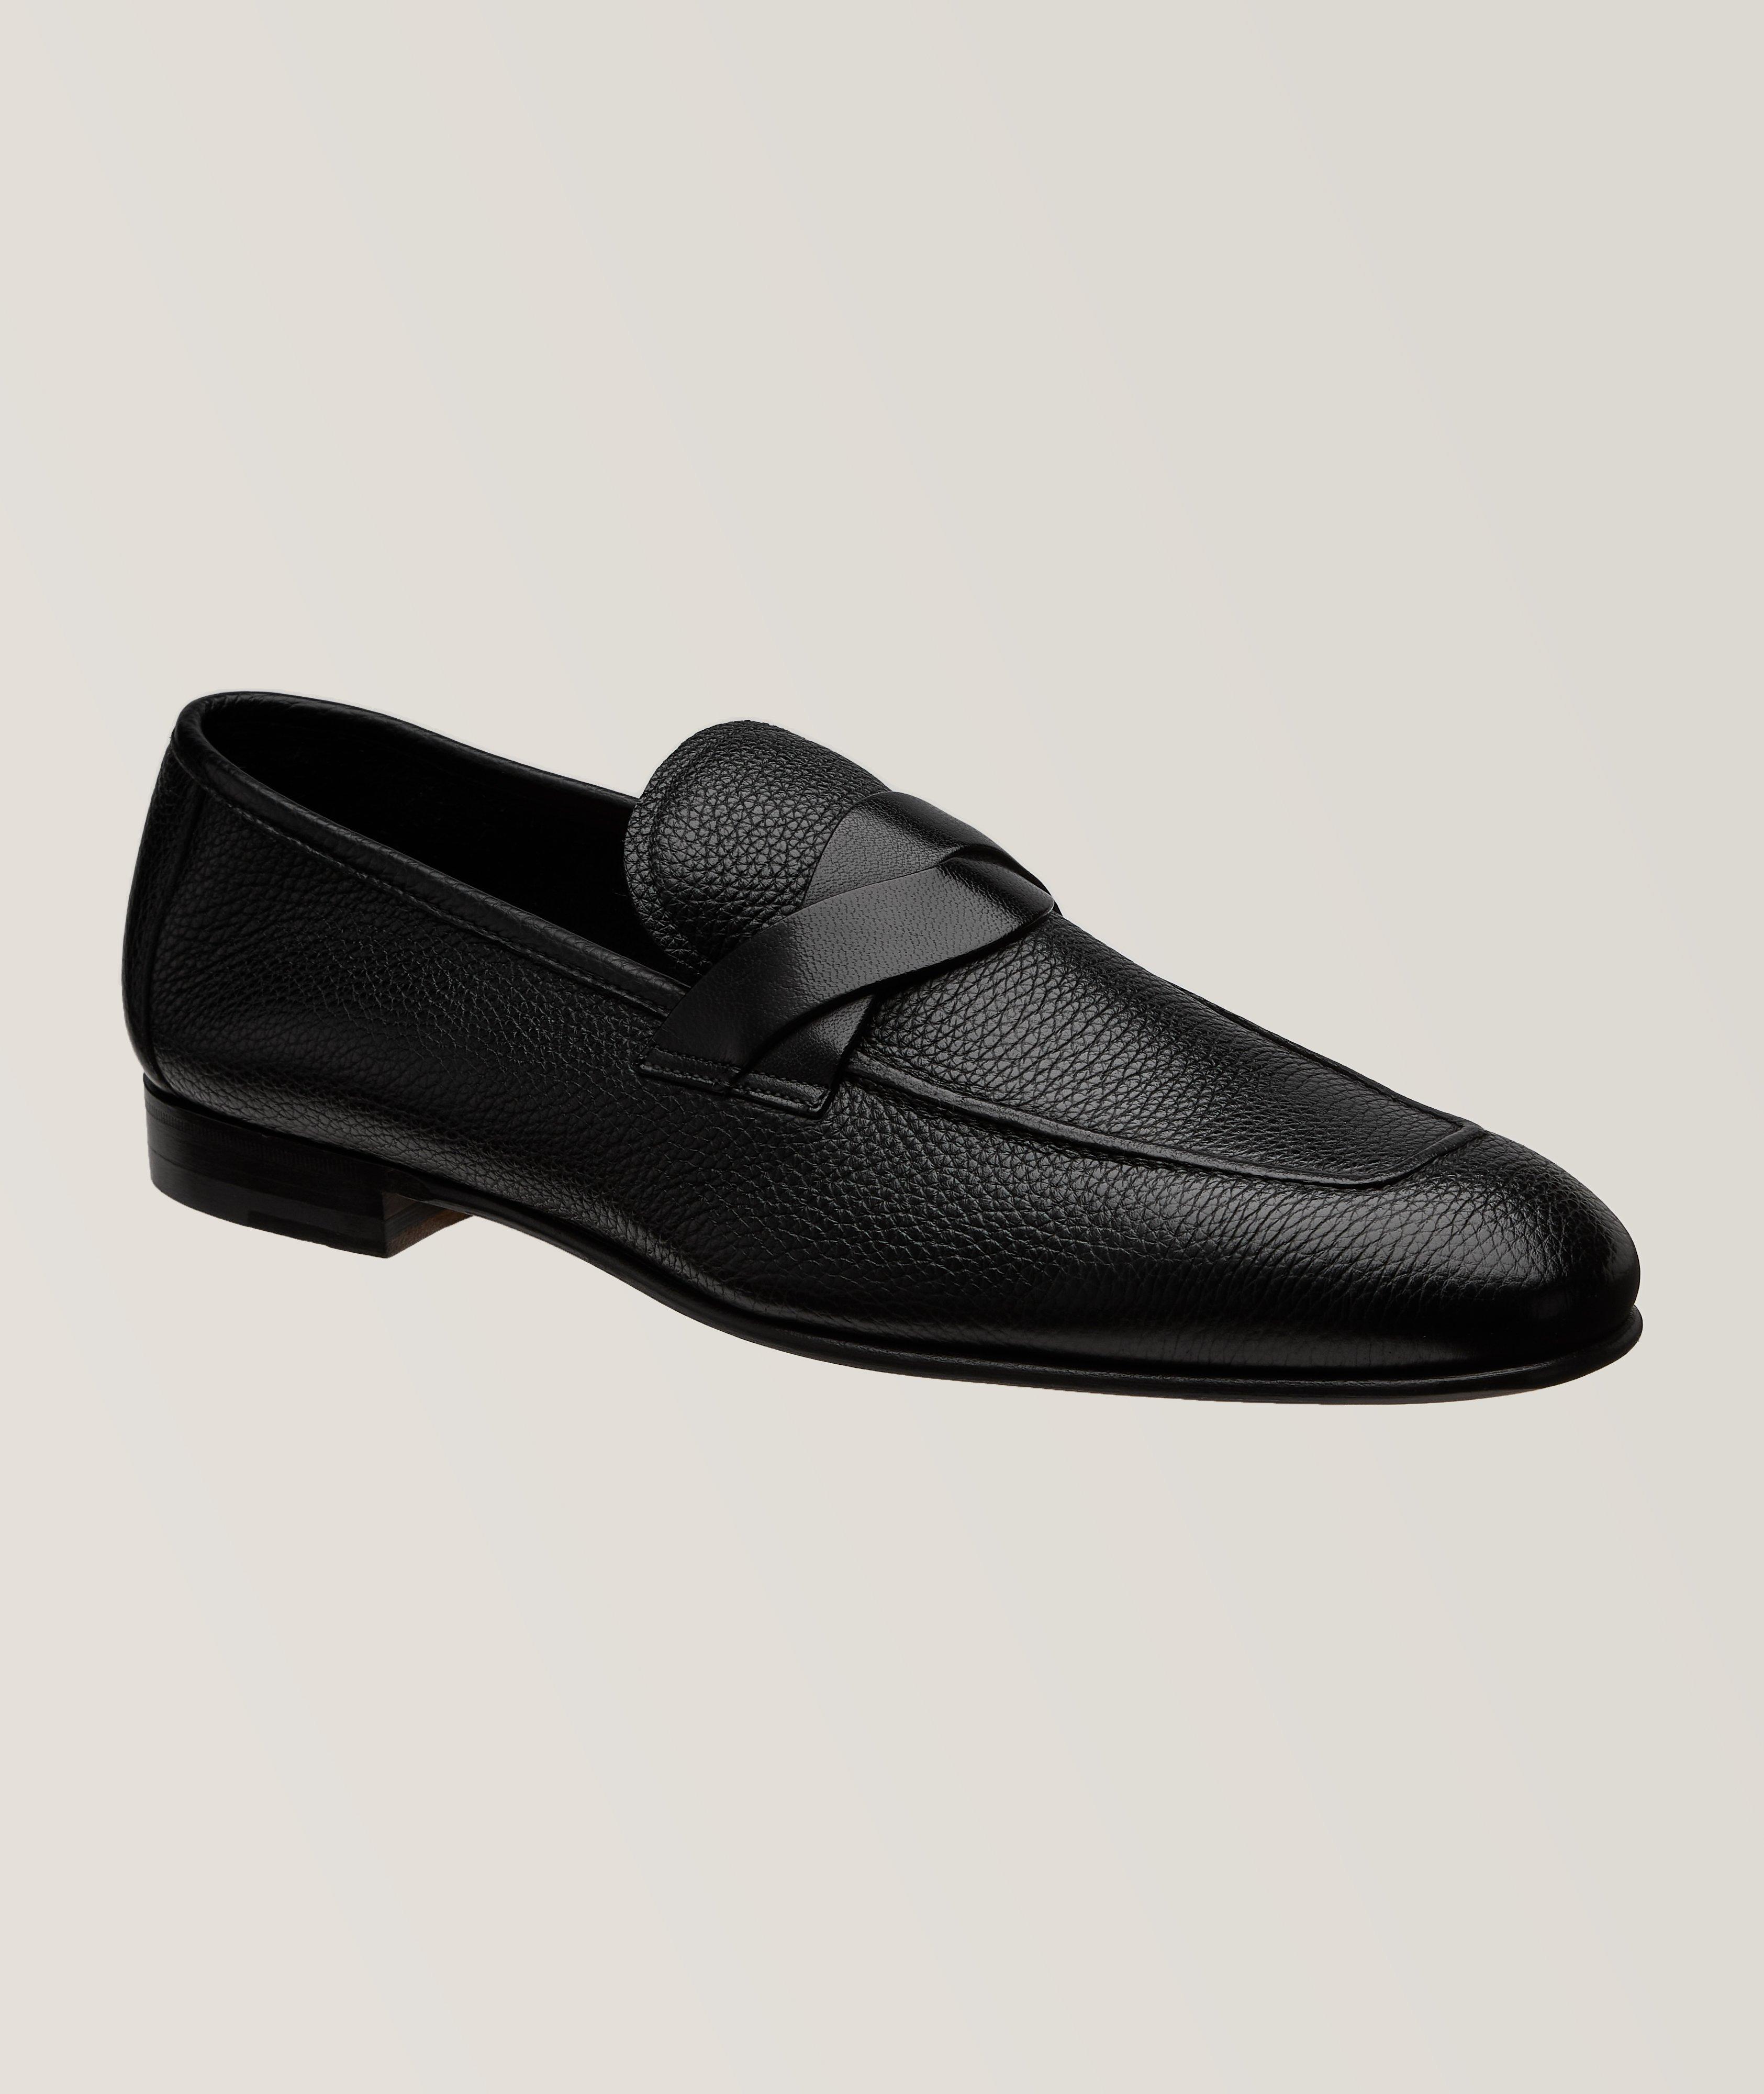 Sean Twisted Grain Leather Loafers image 0